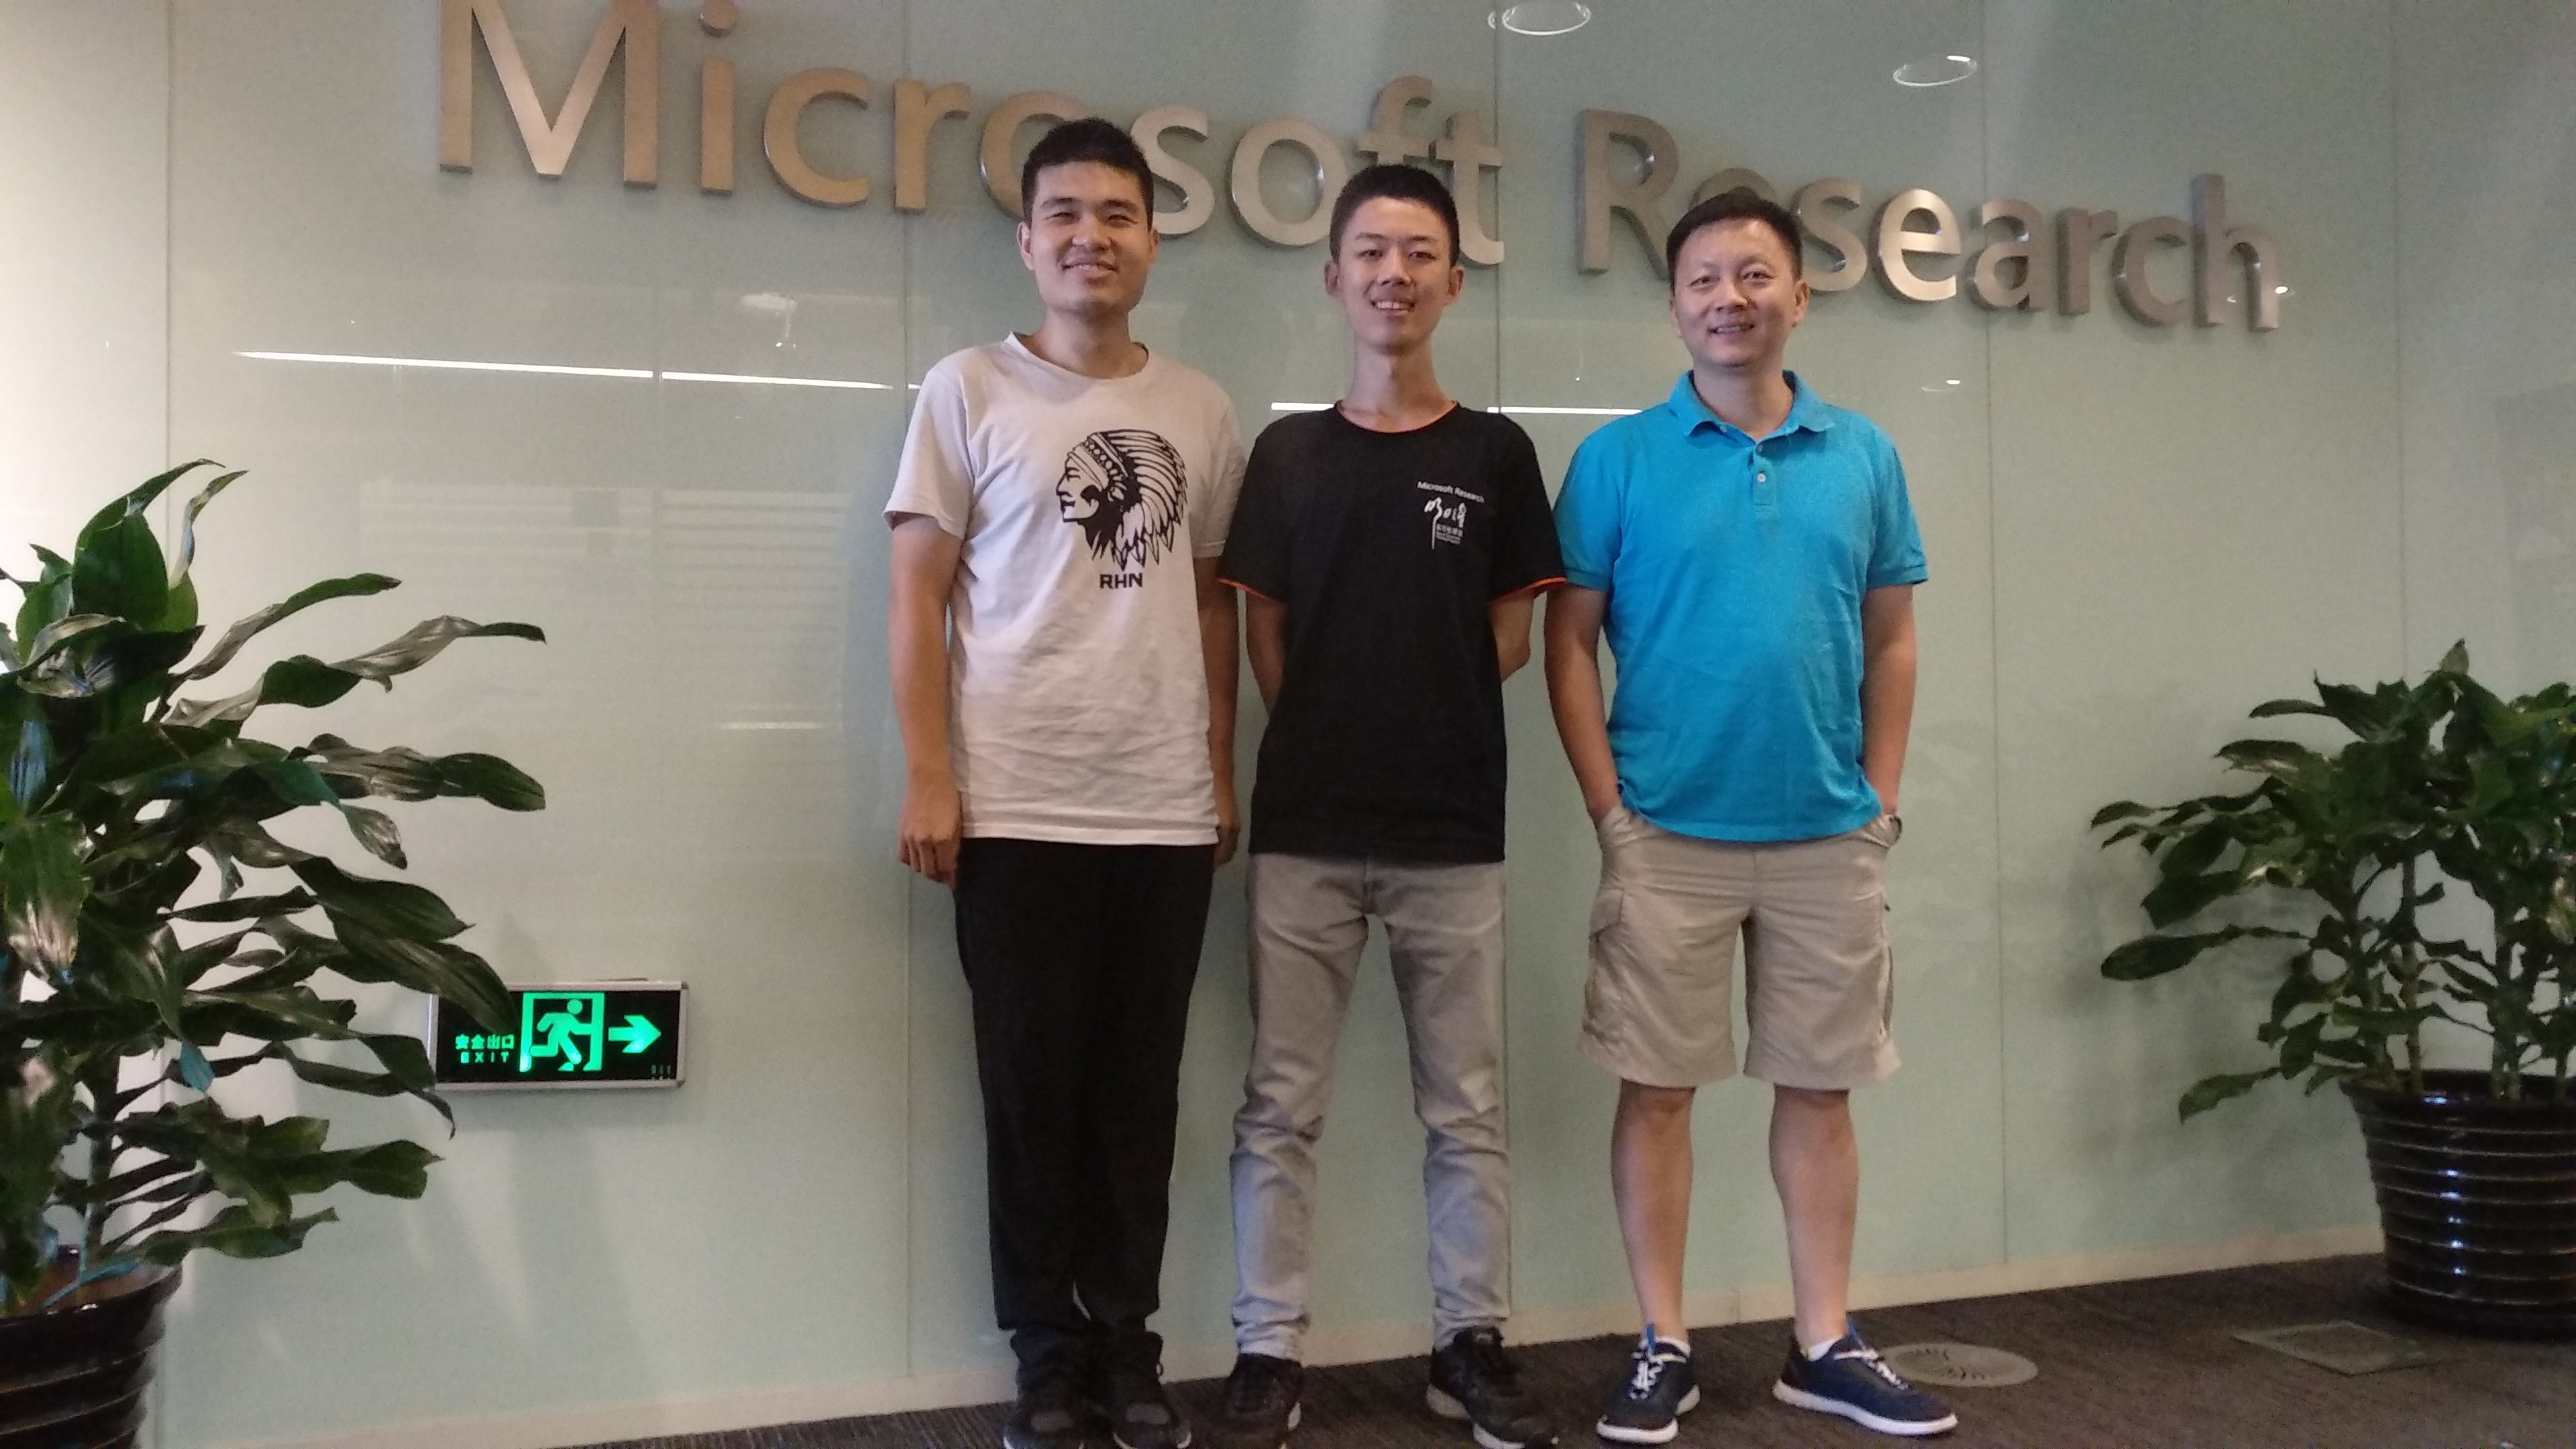 Above: Mentor Lintao Zhang (right), me (left), and Zibo Wang (middle) who interned together